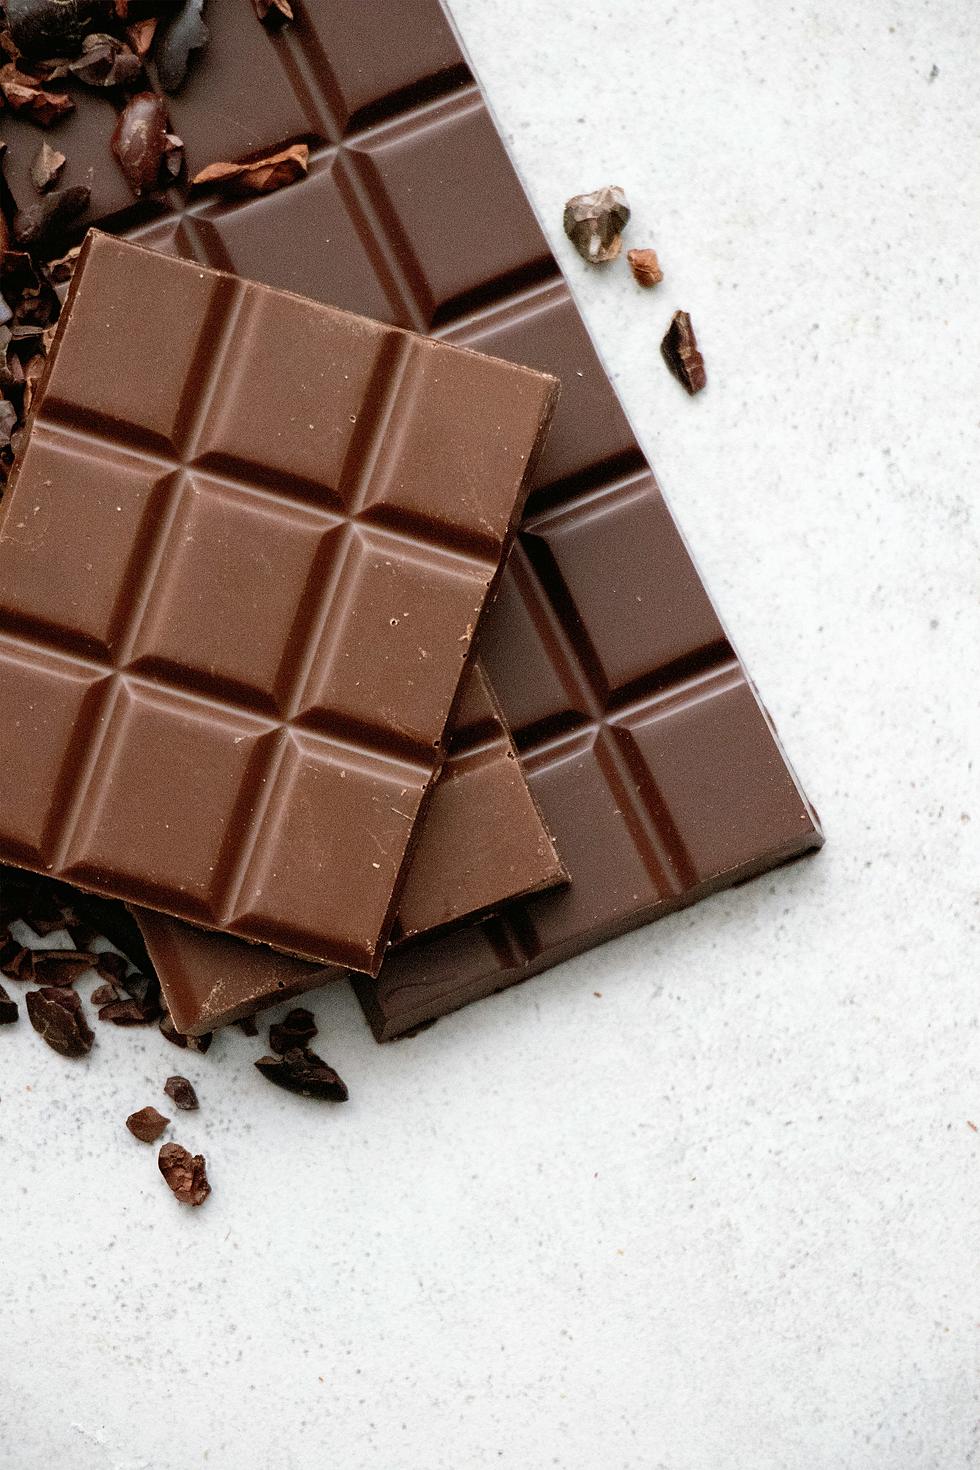 YUM! The New Jersey Chocolate Expo Is This Weekend🍫